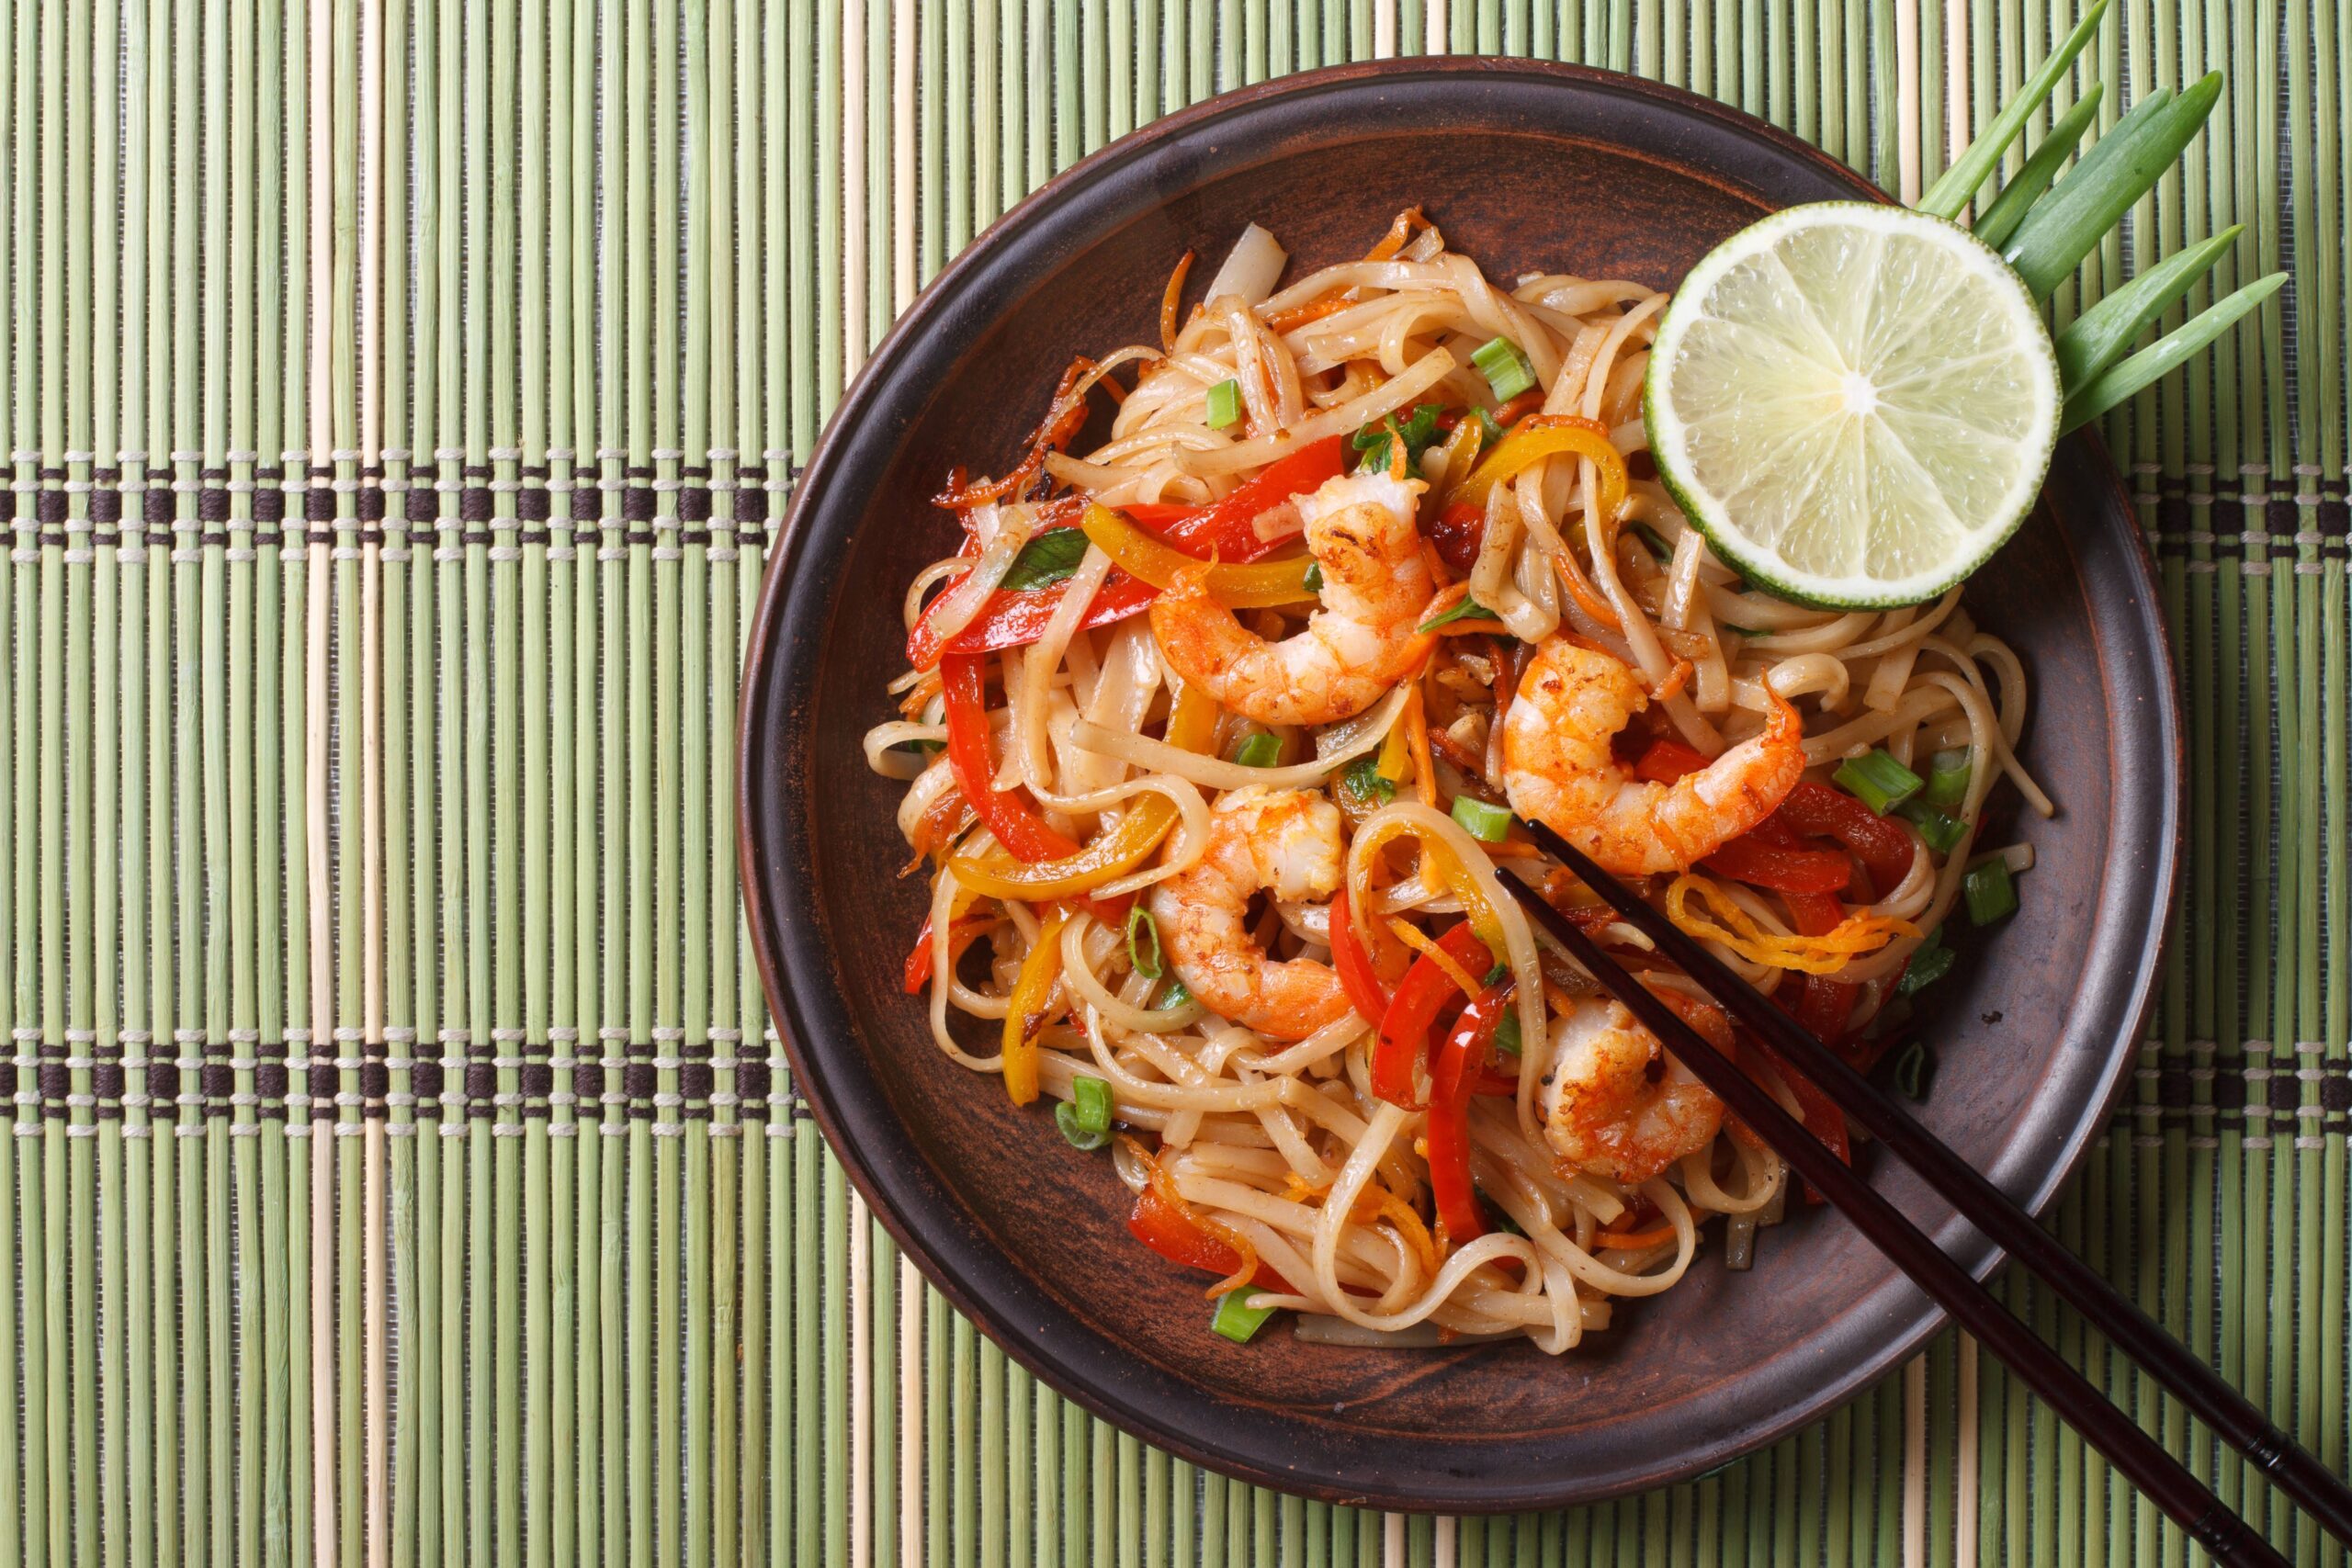 A delicious plate of pad thai